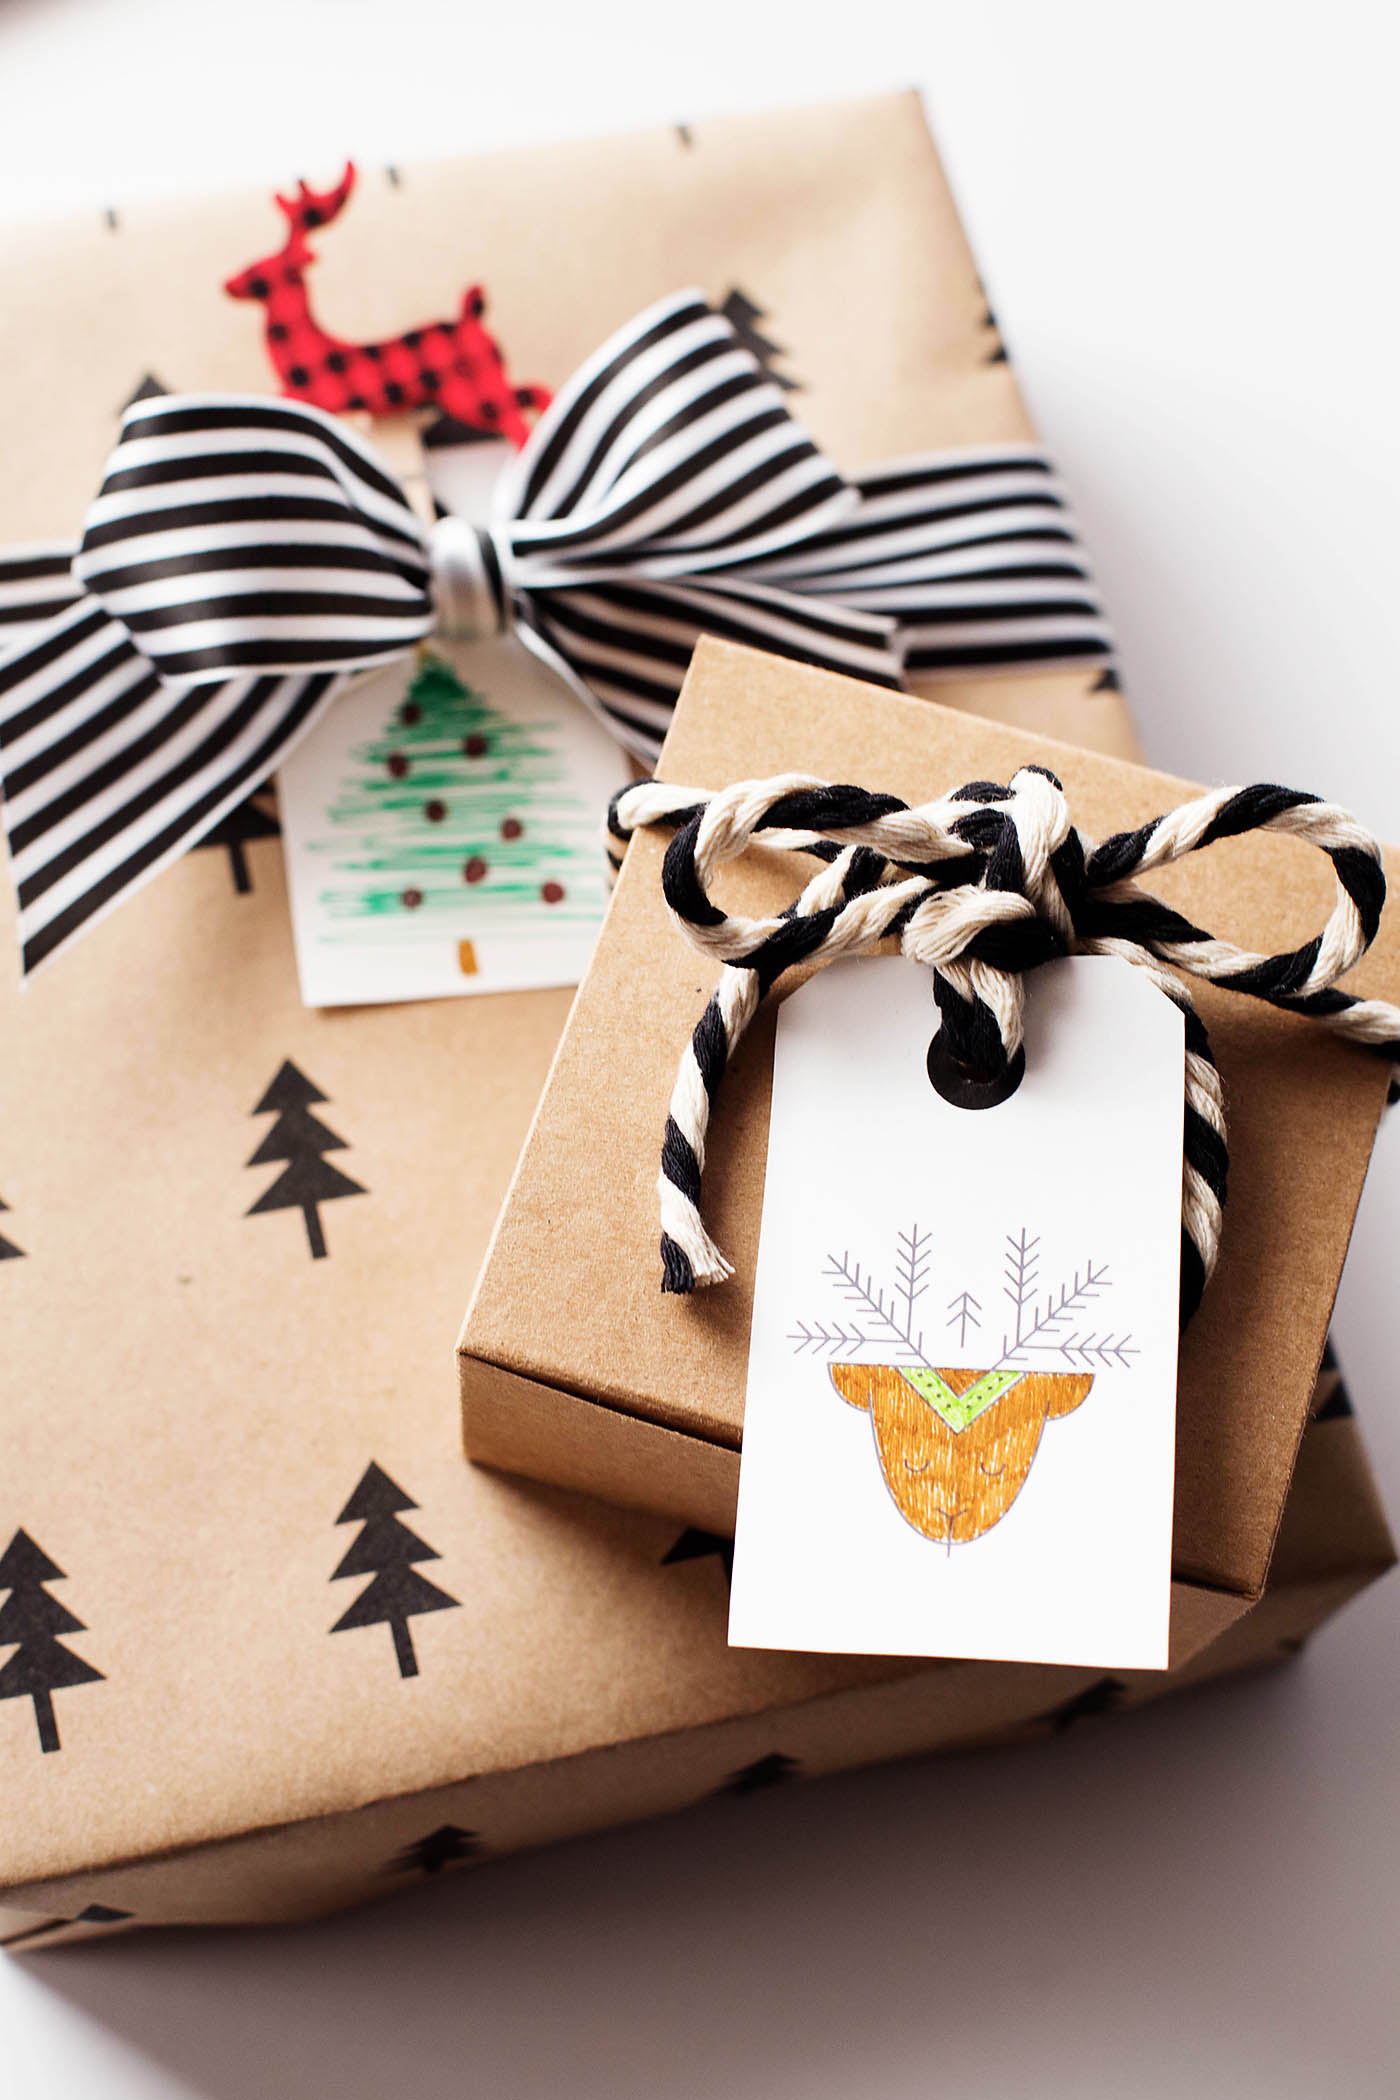 Free printable coloring (or blank) gift tags